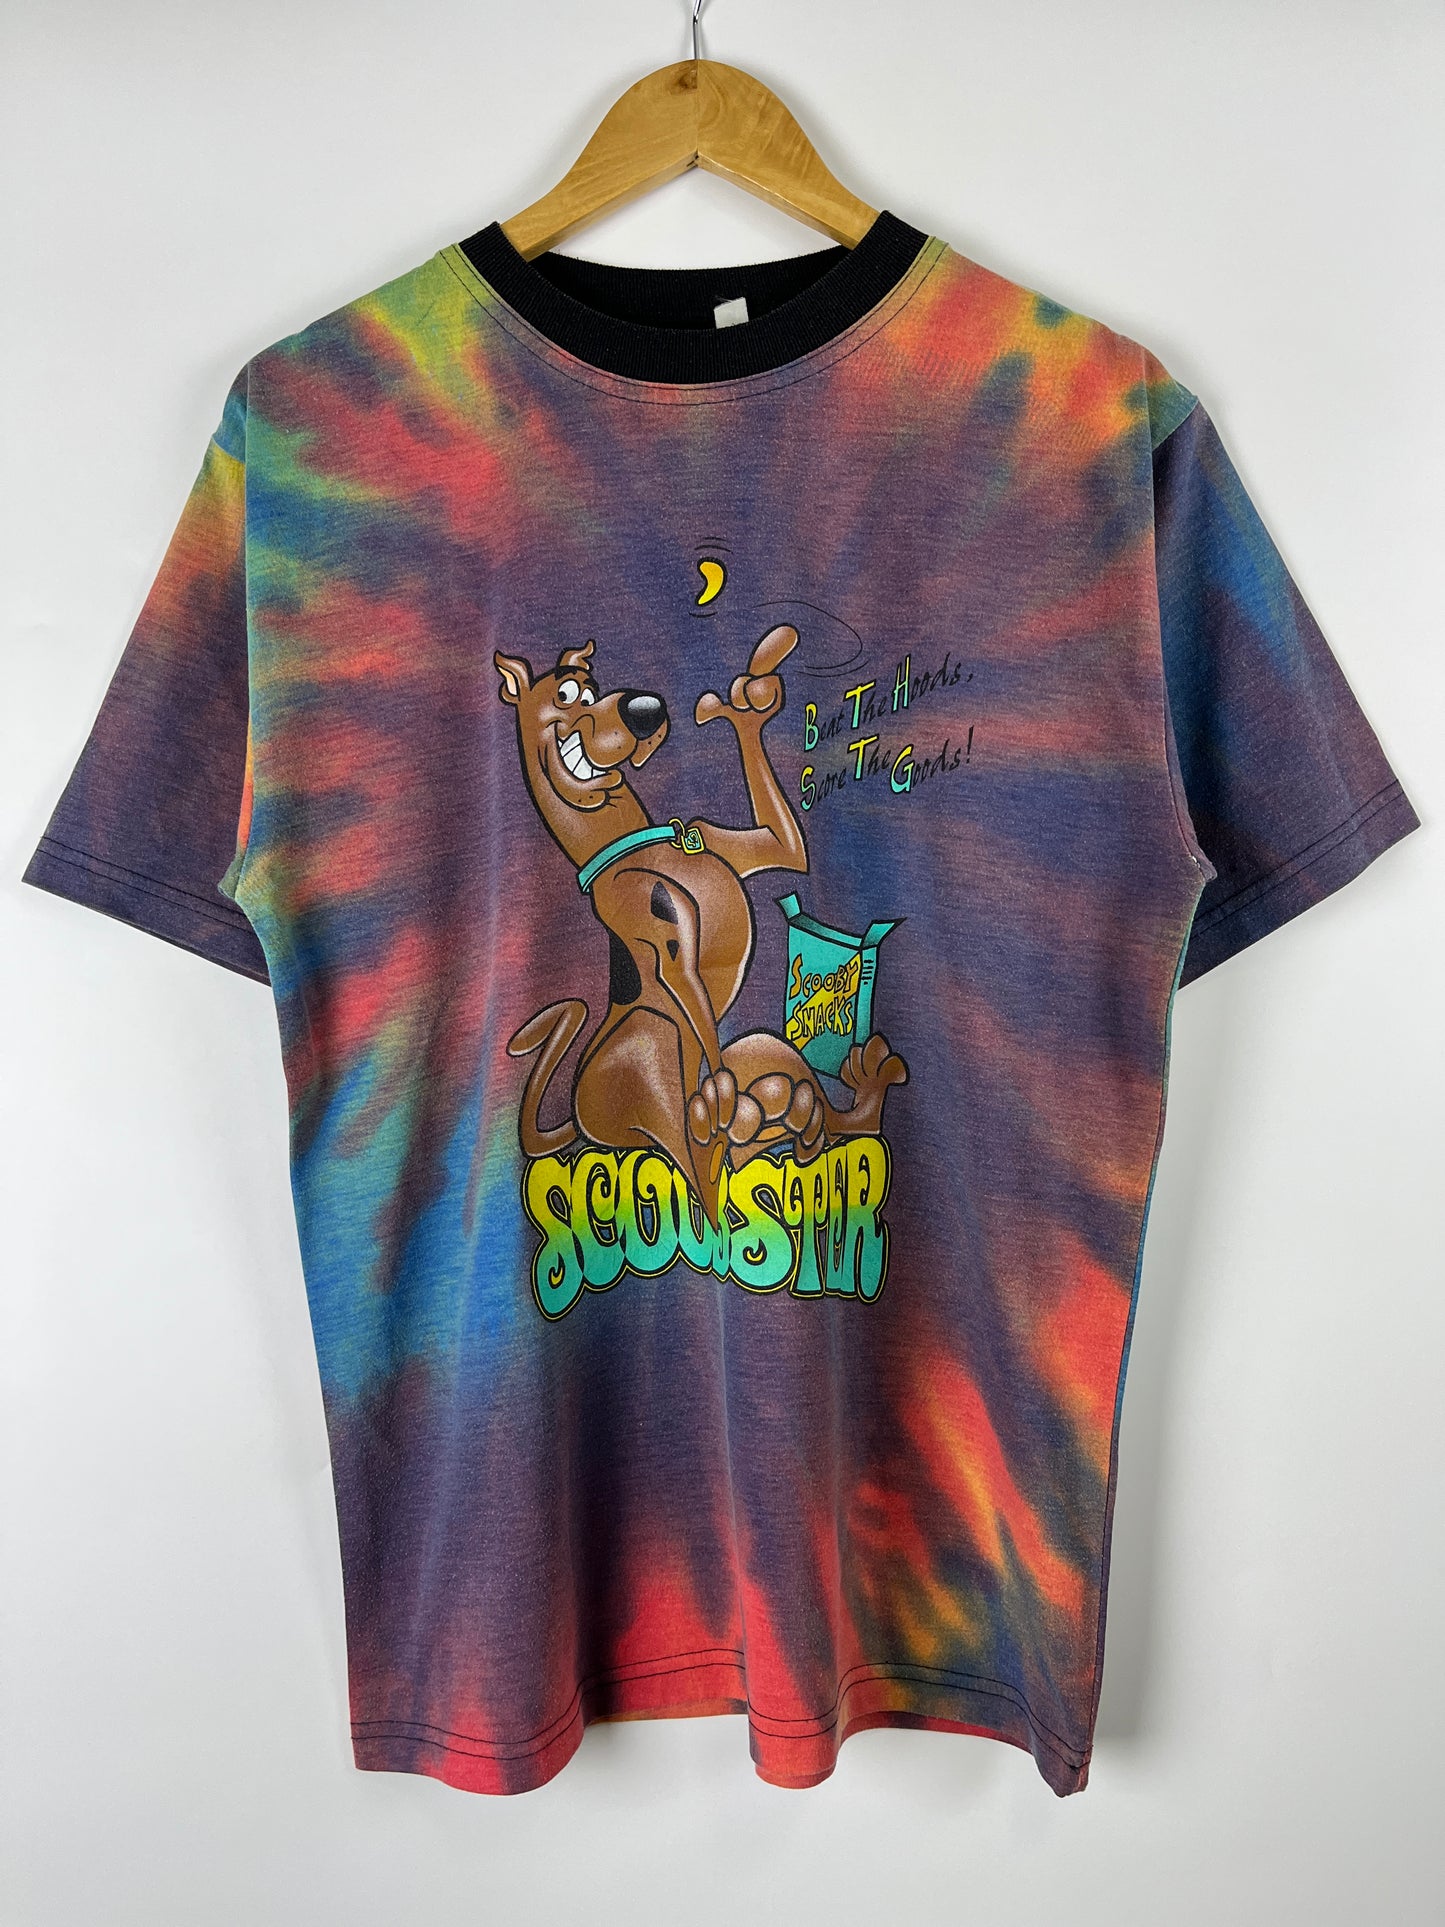 Vintage Scooby Doo "Scoobster" 1998 T-shirt